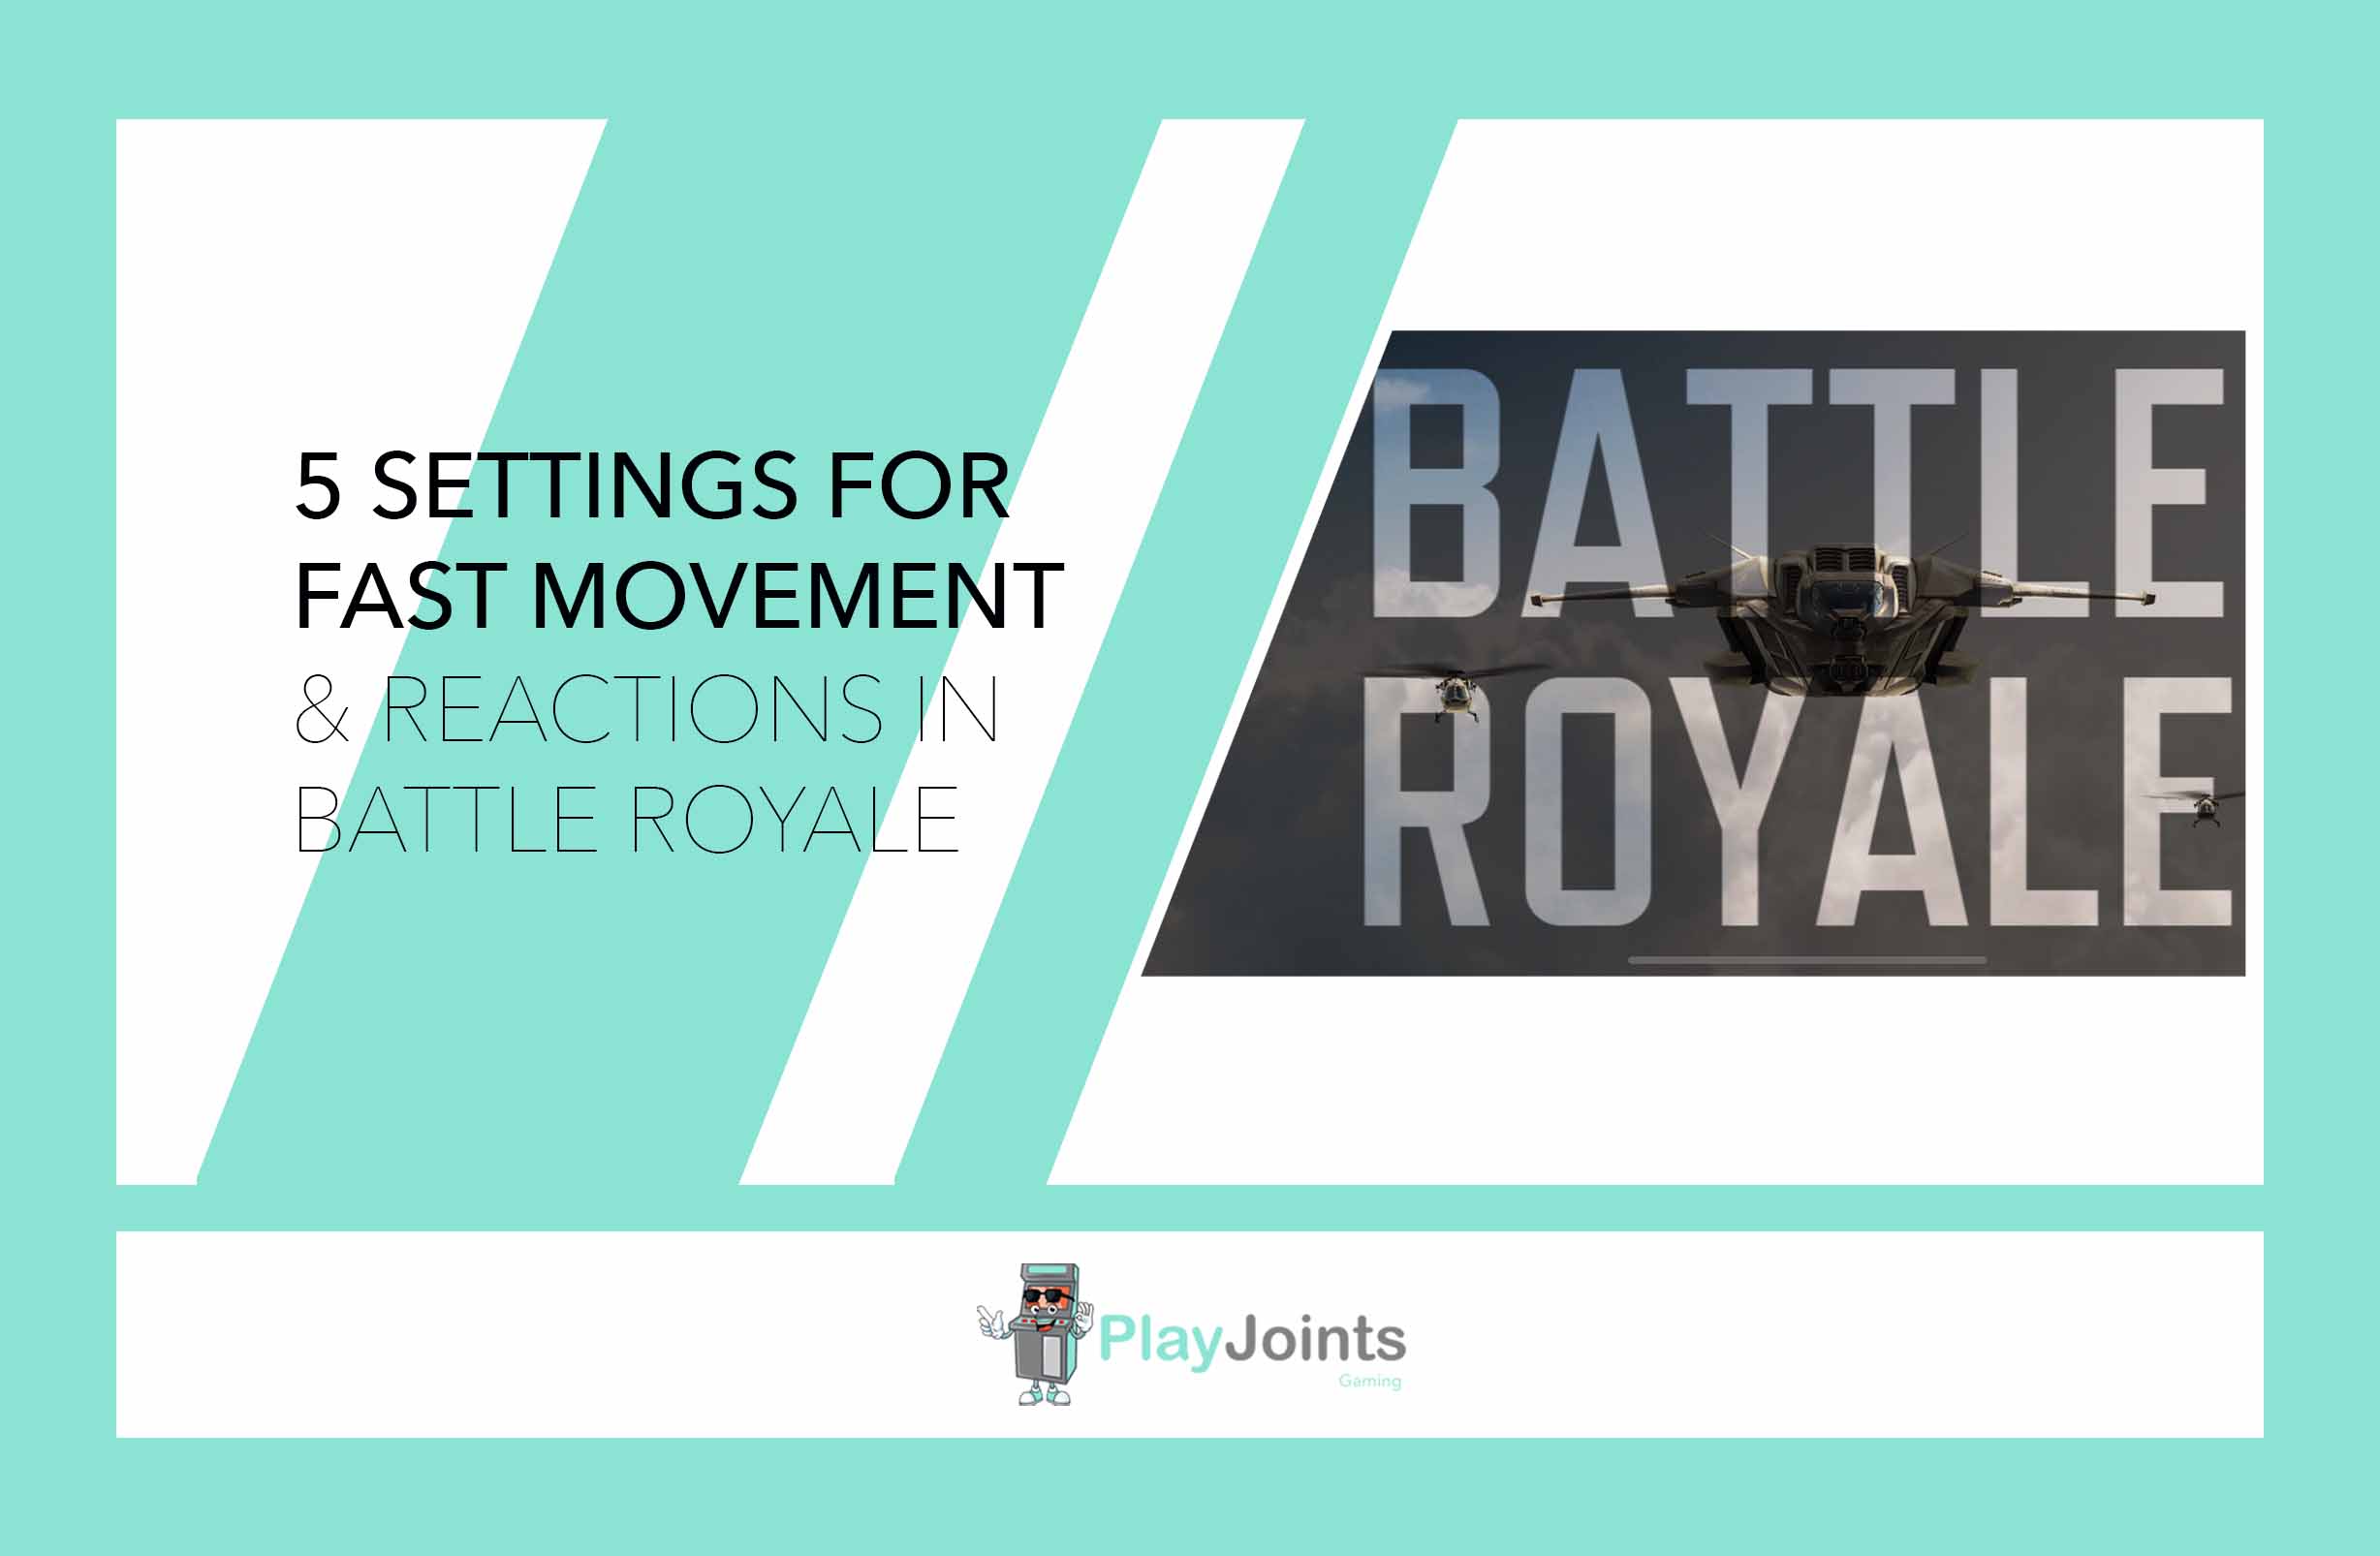 5 Settings for Fast Movements & Reactions in Battle Royale